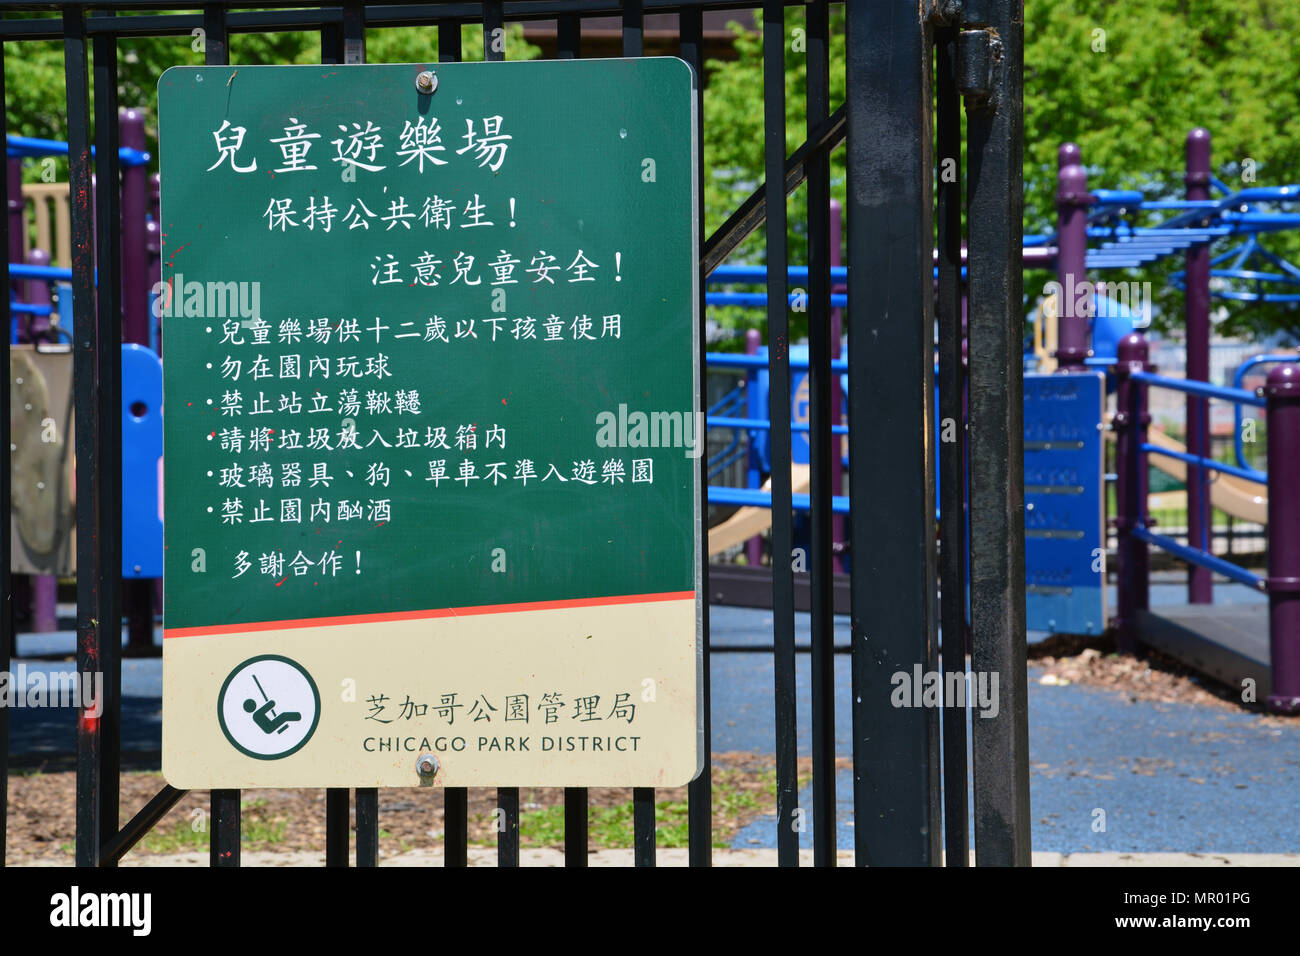 Playground signs in Ping Tom Memorial Park in Chicago's Chinatown can be found in both English and Chinese. Stock Photo